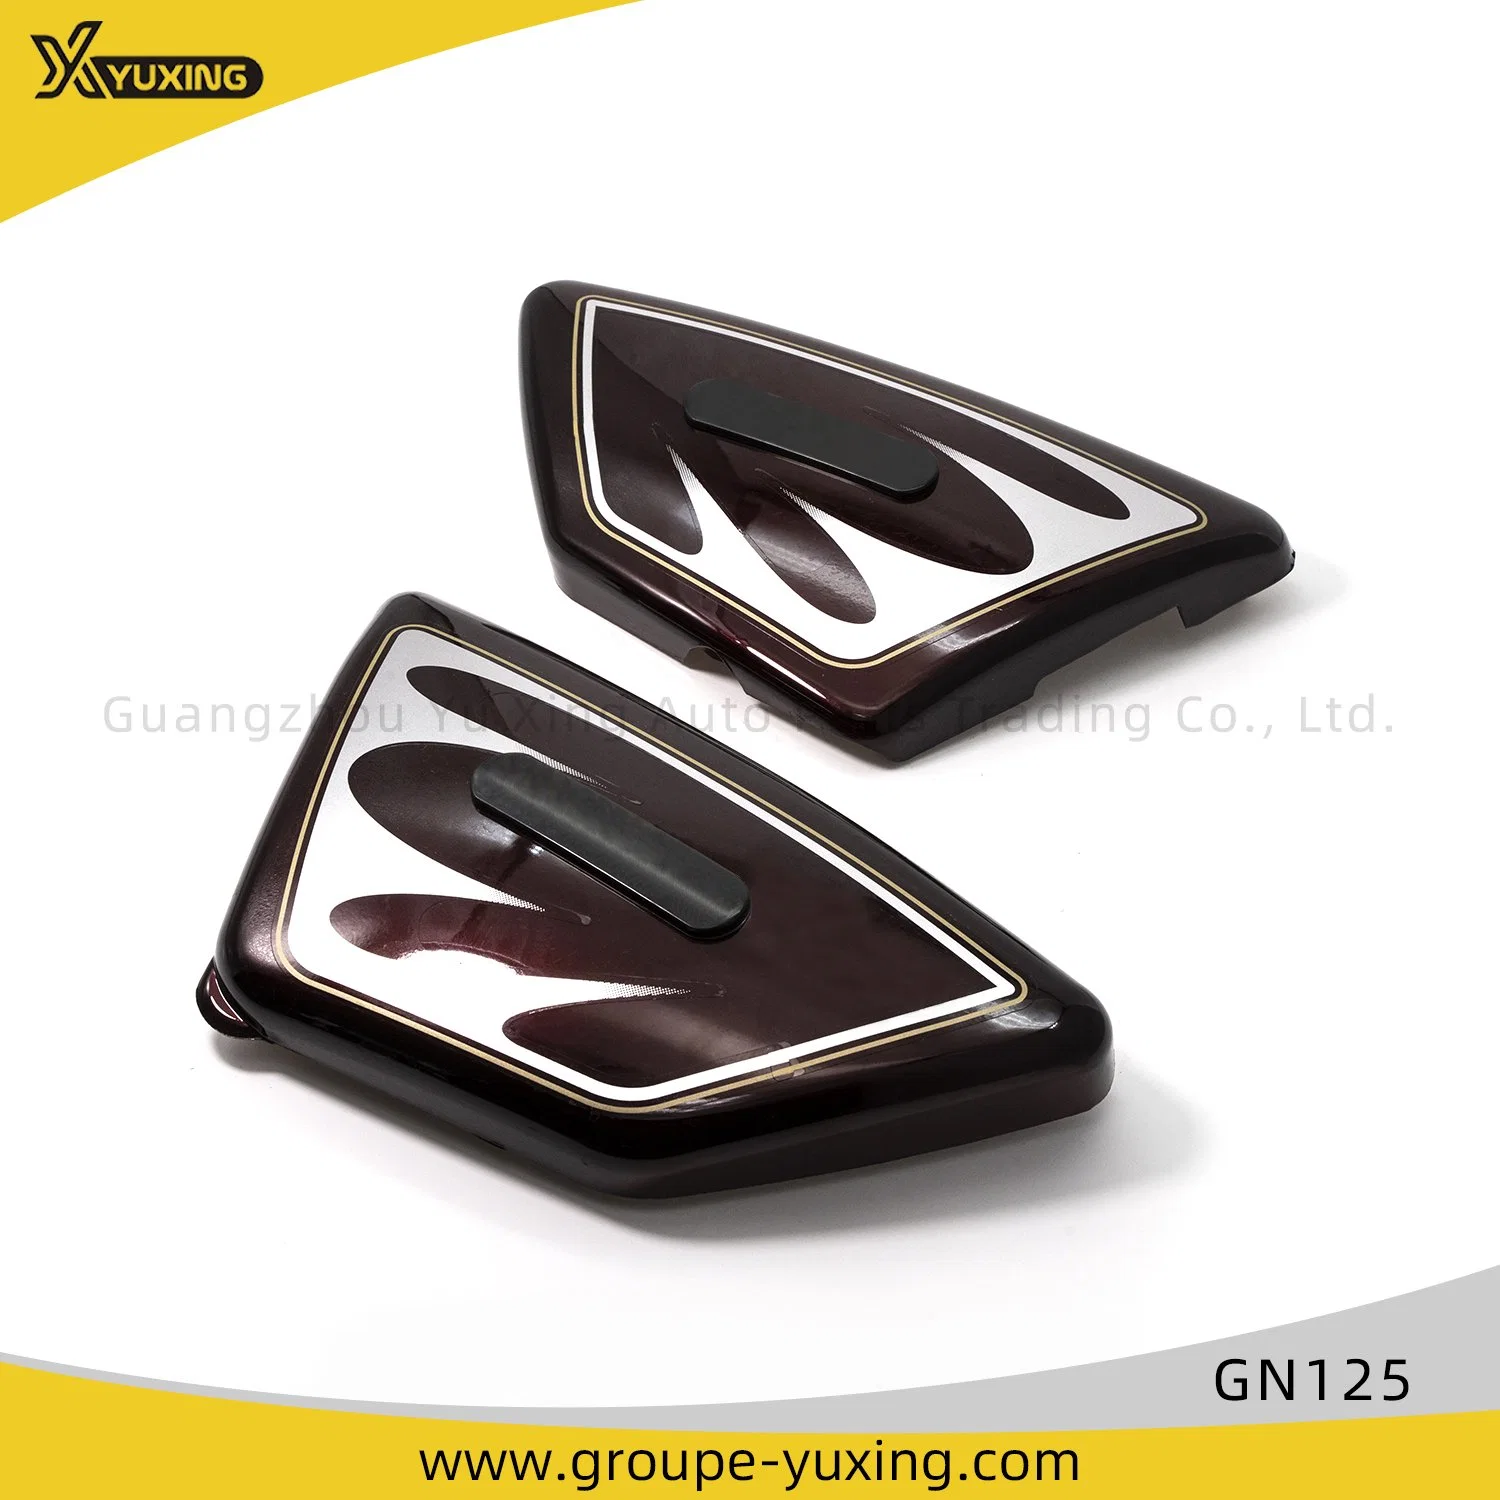 Motorcycle Engine Parts Motorcycle Partsside Cover for 50/70cc/90cc/110cc/125cc/200cc/250cc Gn125 Motorcycle Parts